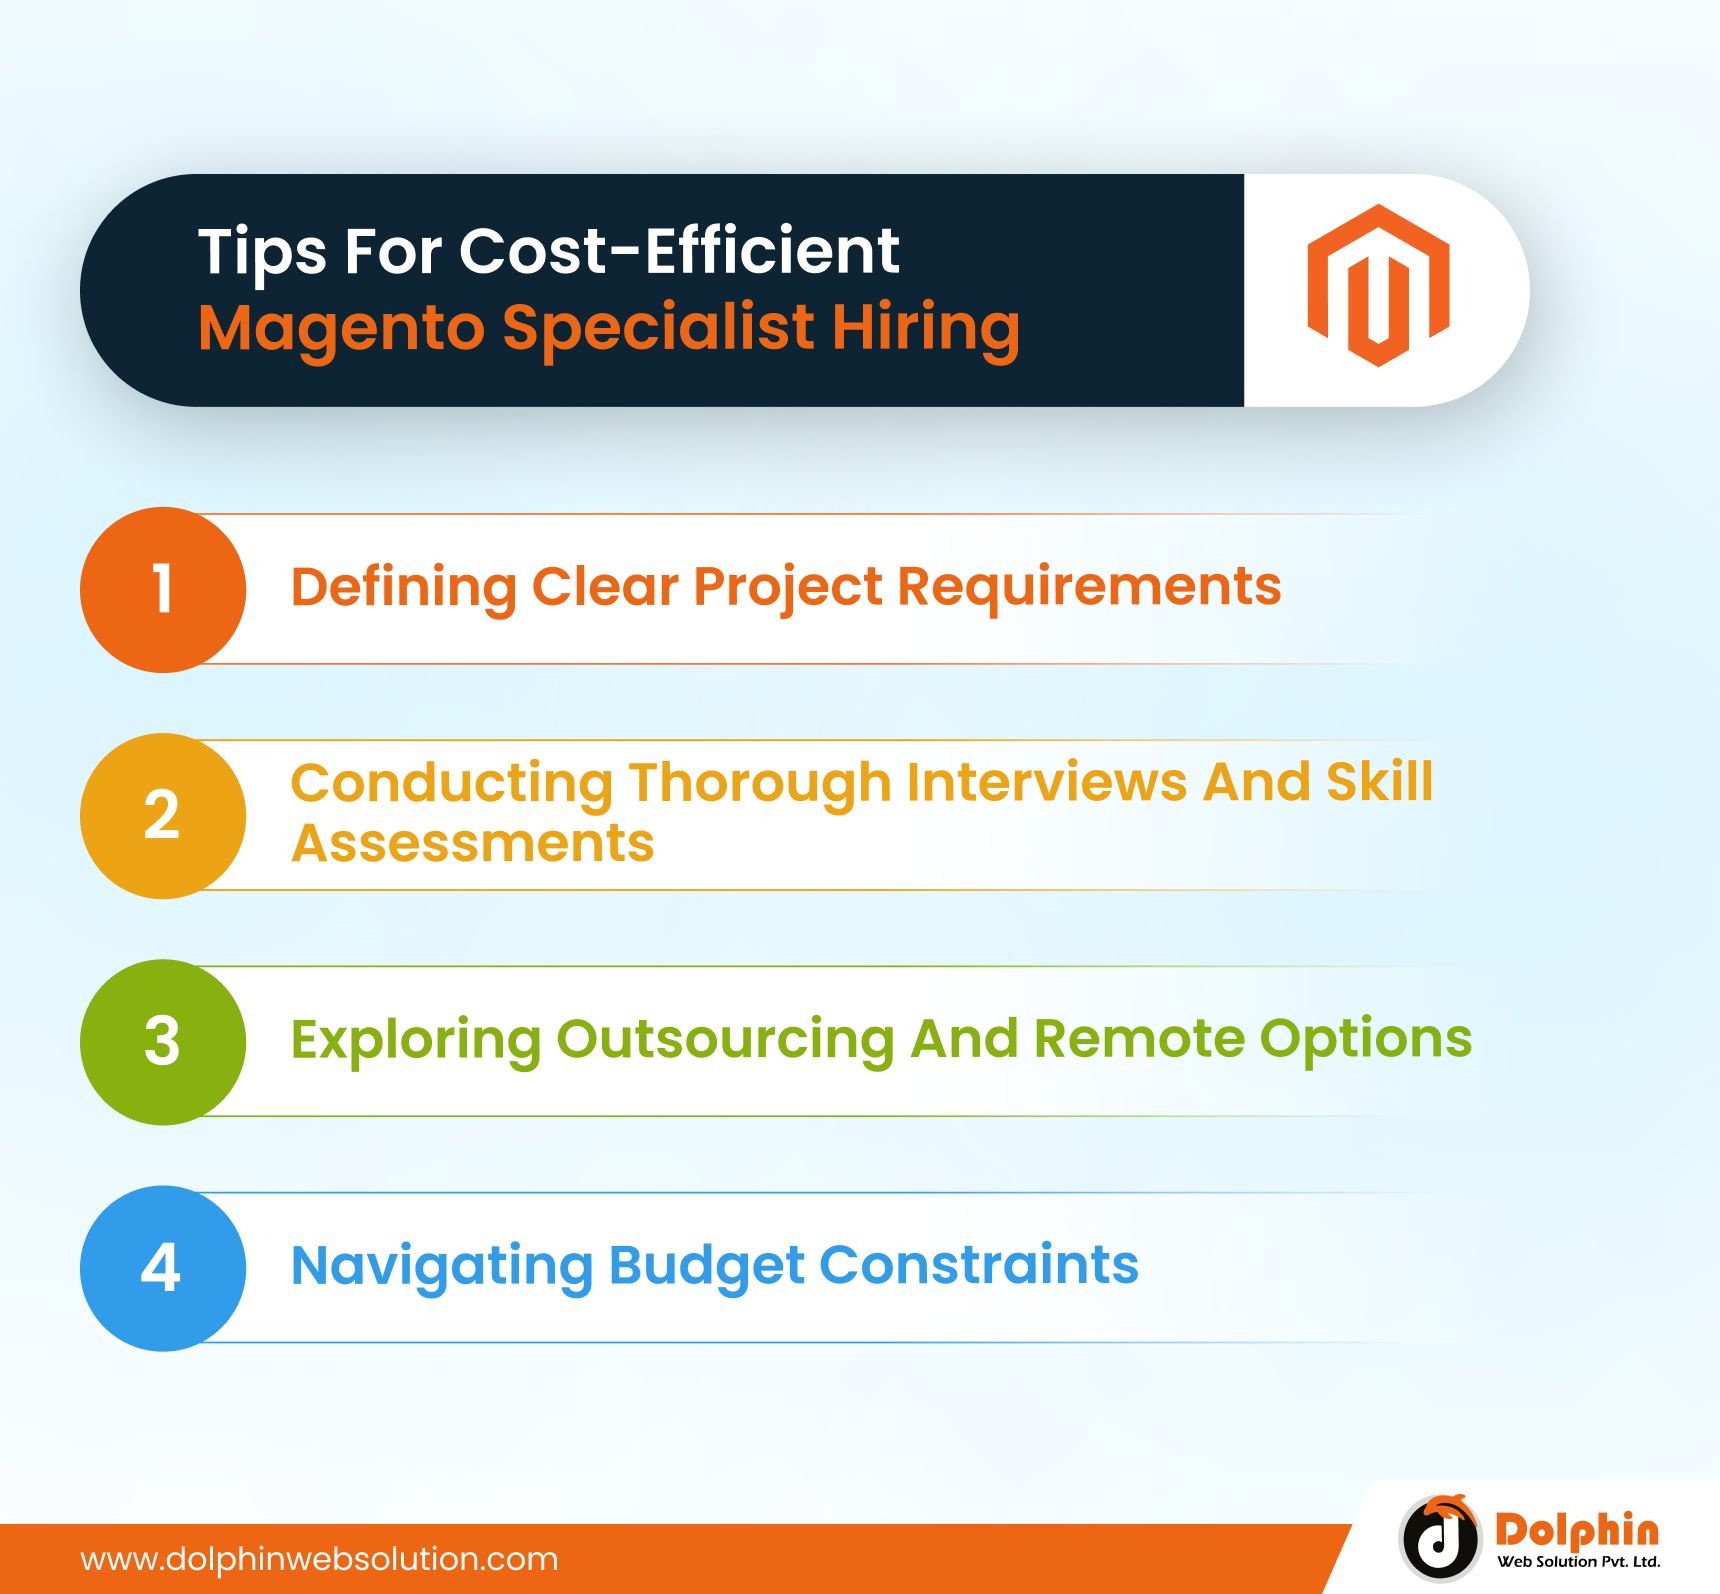 Tips For Cost-Efficient Magento Specialist Hiring